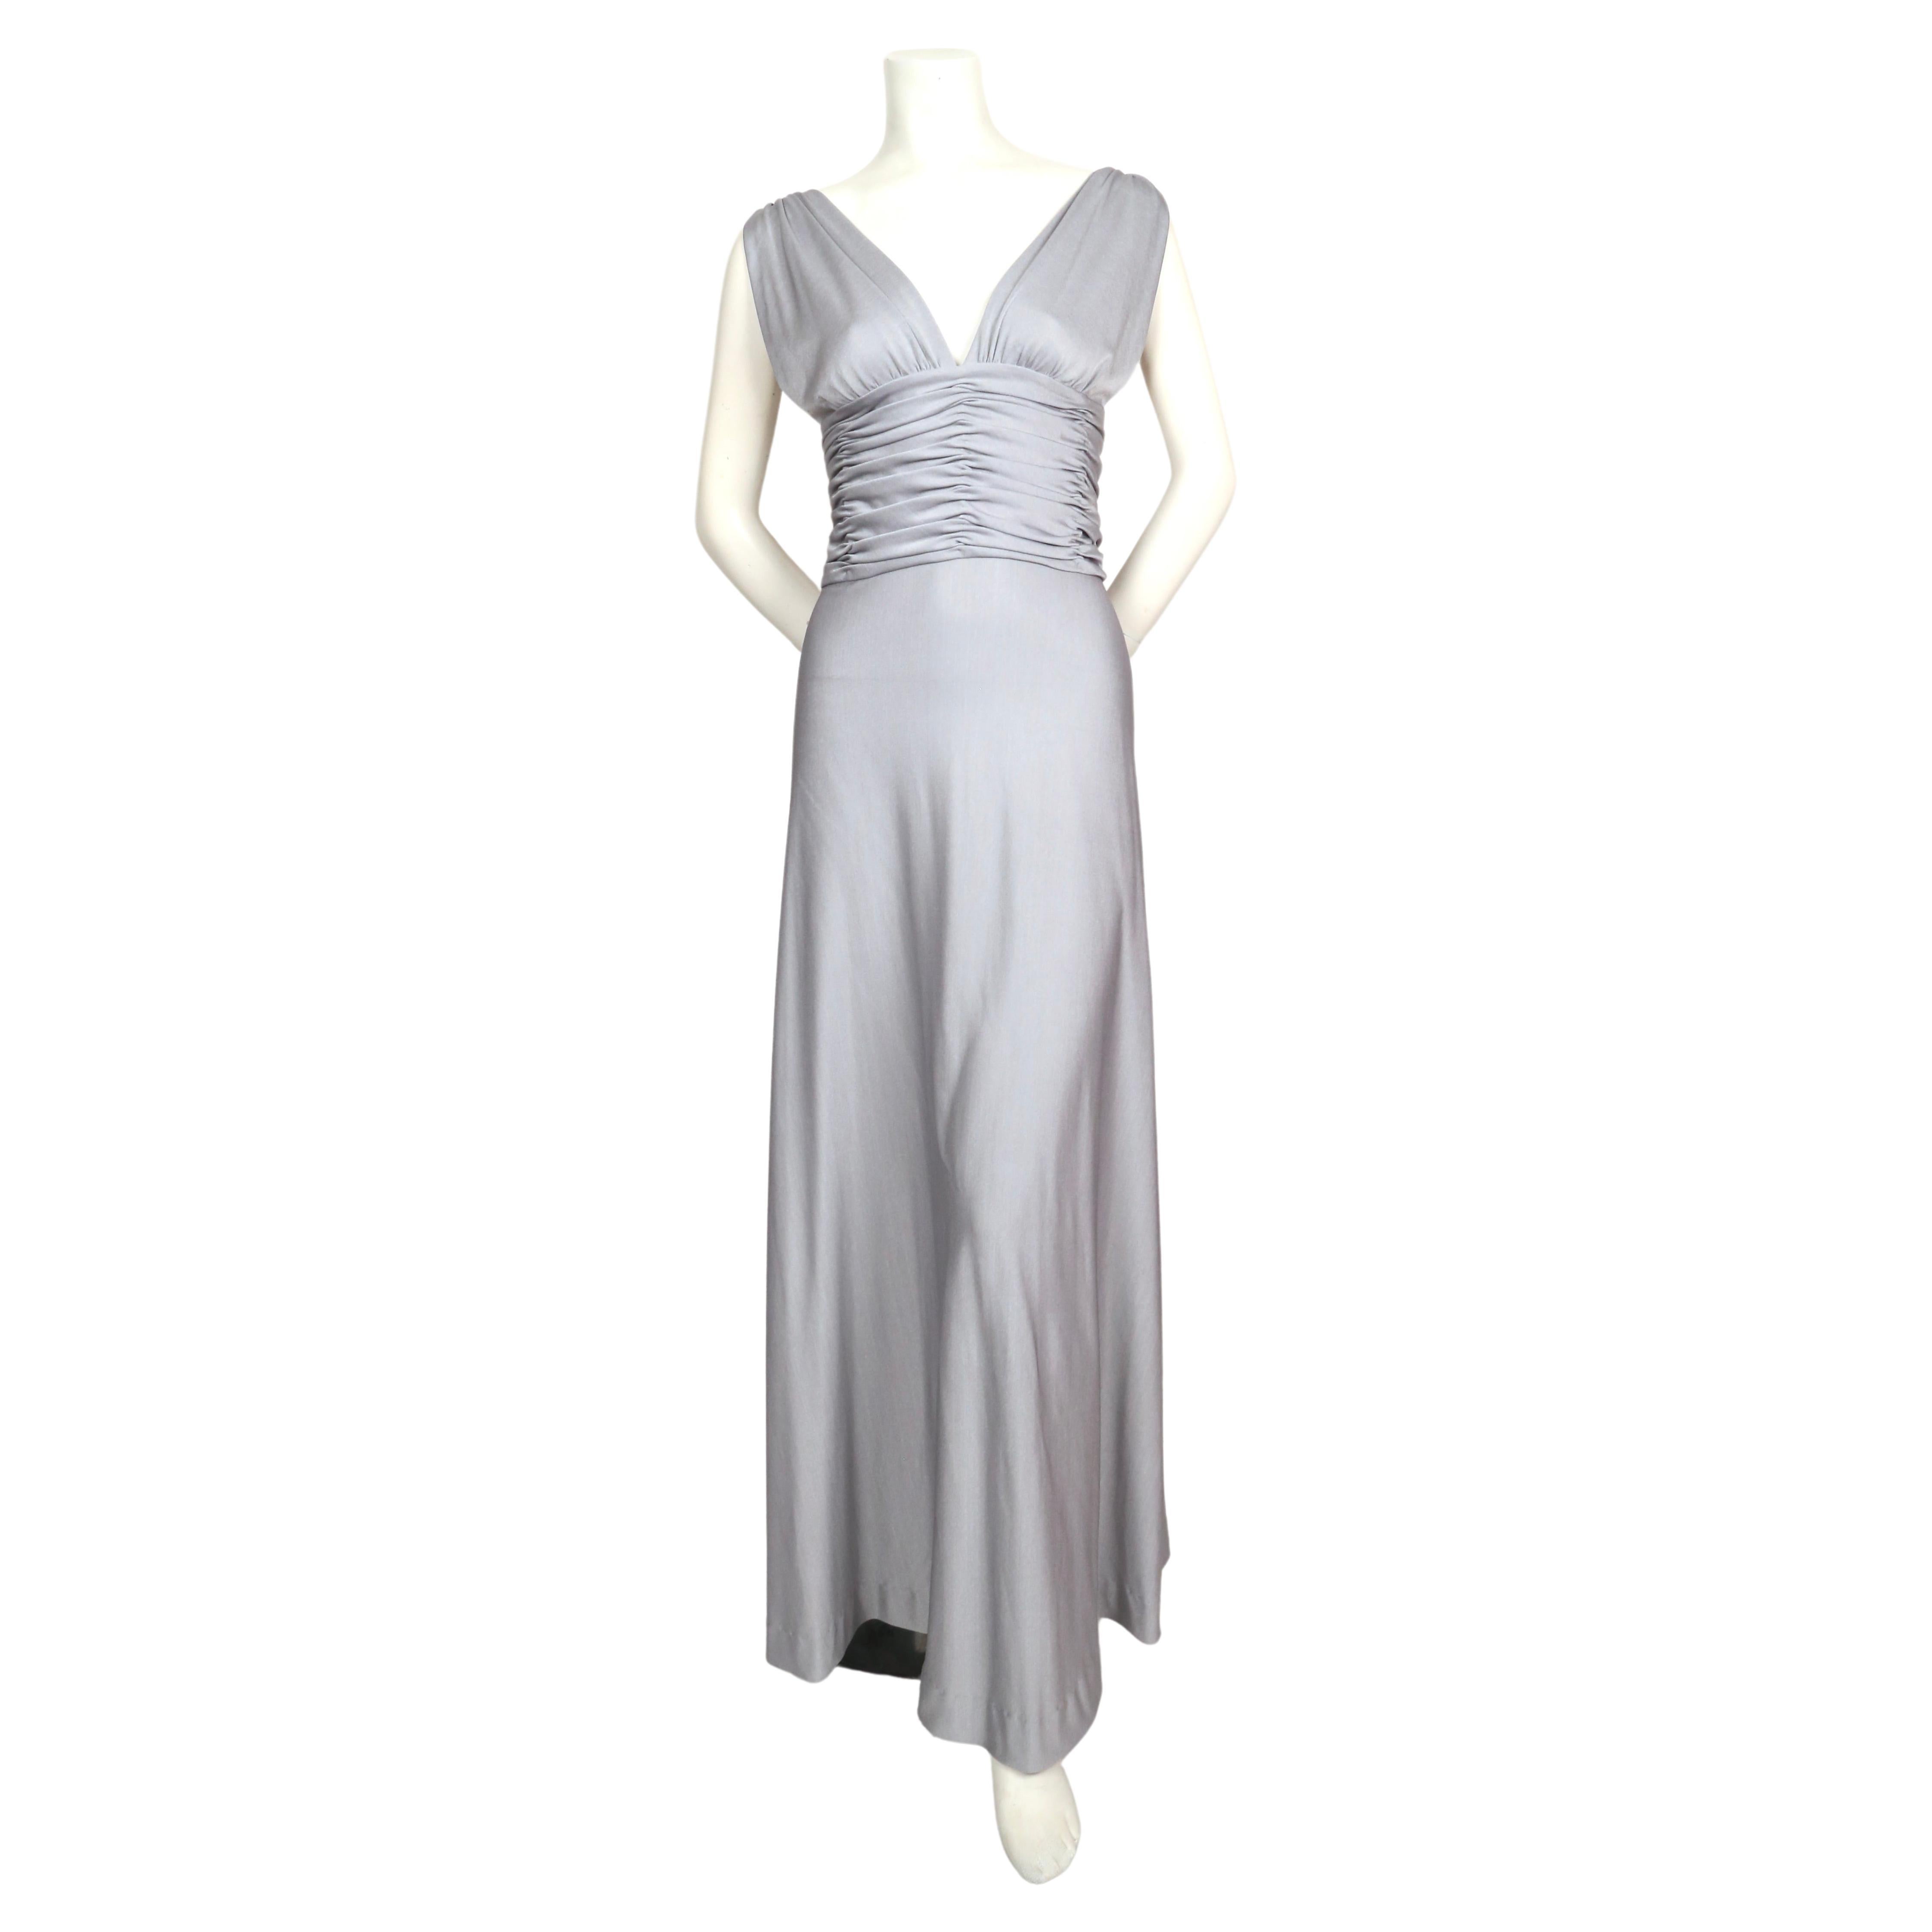 Stunning icy silver blue jersey gown with ruching from Loris Azzaro dating to the 1970's. Dress best fits a size 2-4. Approximate measurements:  32-34